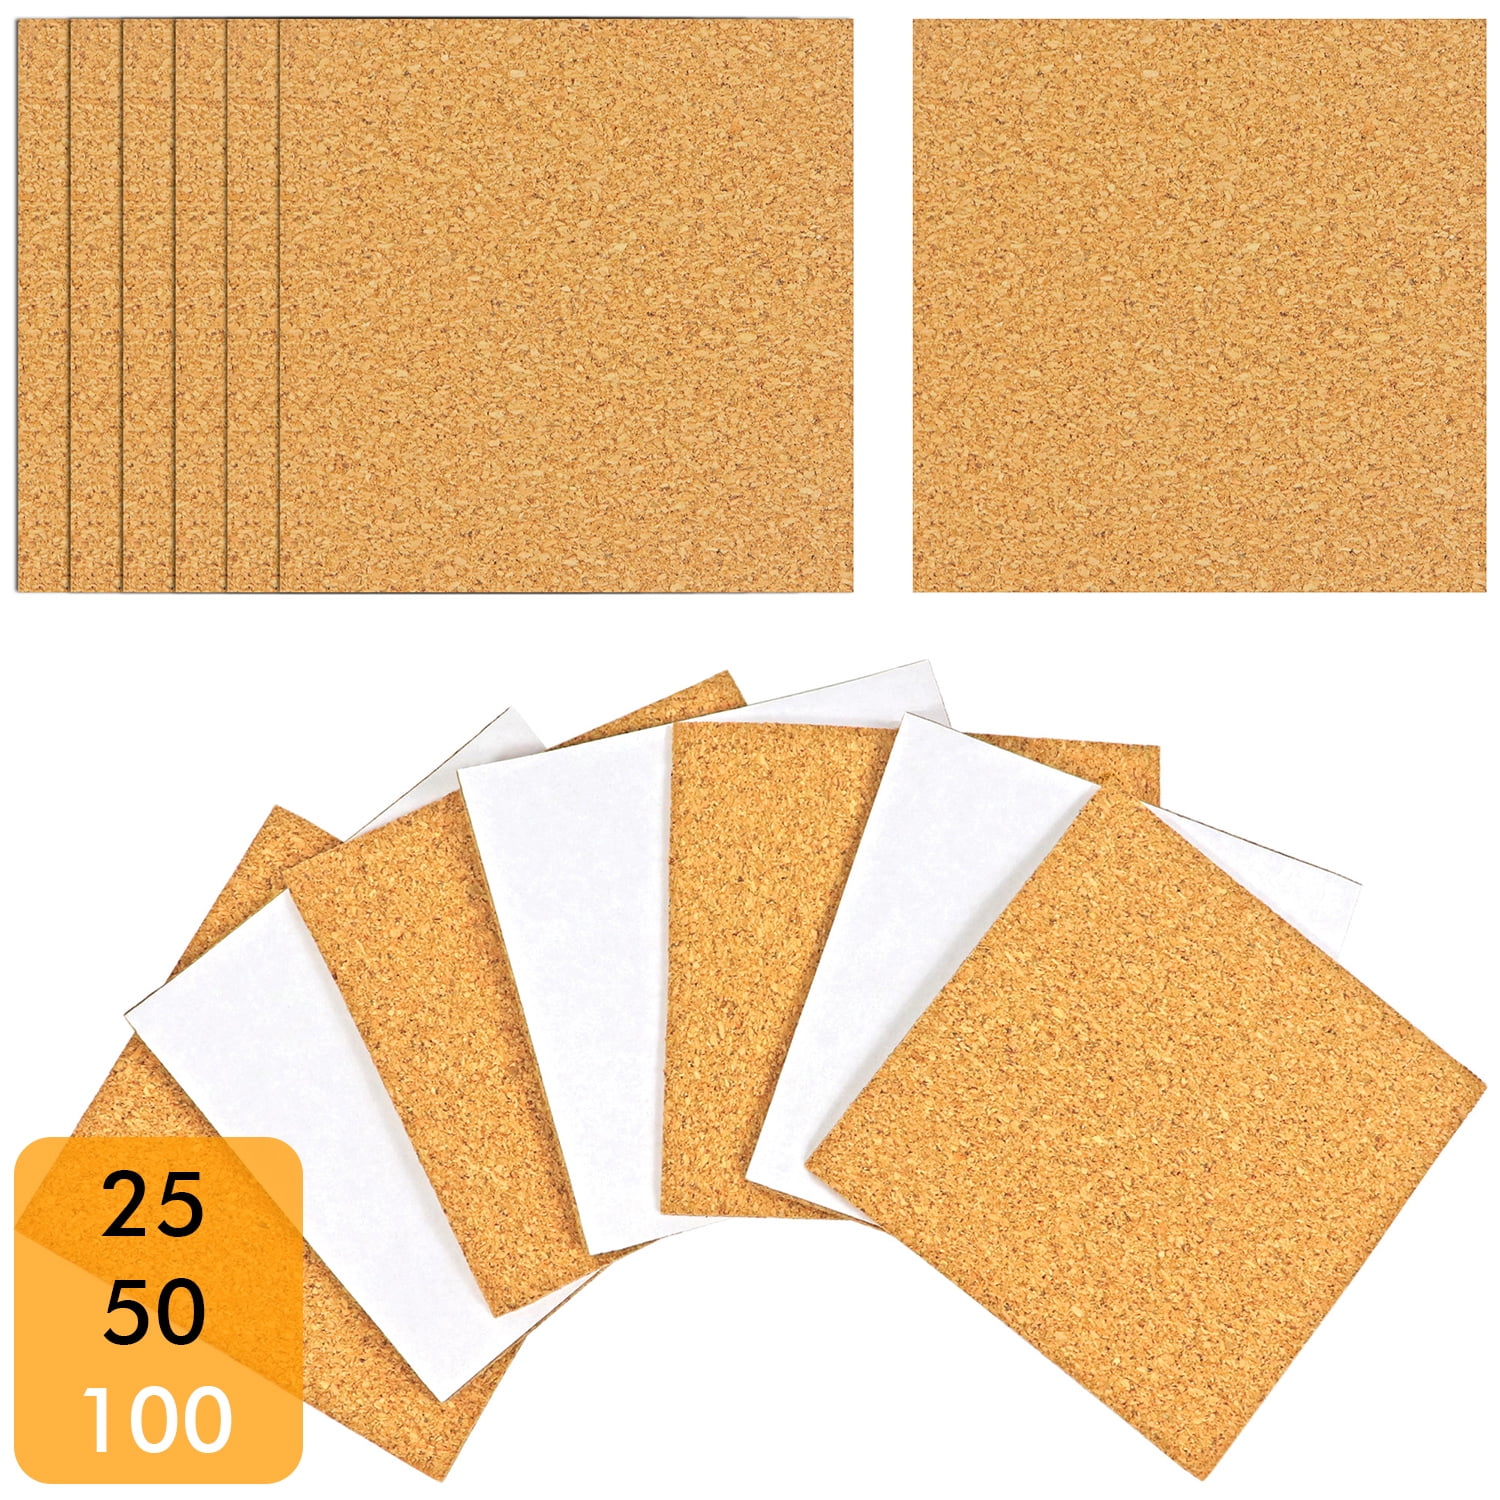 LEXININ 200 Pcs 4 x 4 inch Self Adhesive Cork Coaster Backing Sheets, 1mm Thick Small Cork Board Tiles Backing, Square Sticky Cork Board Mat for